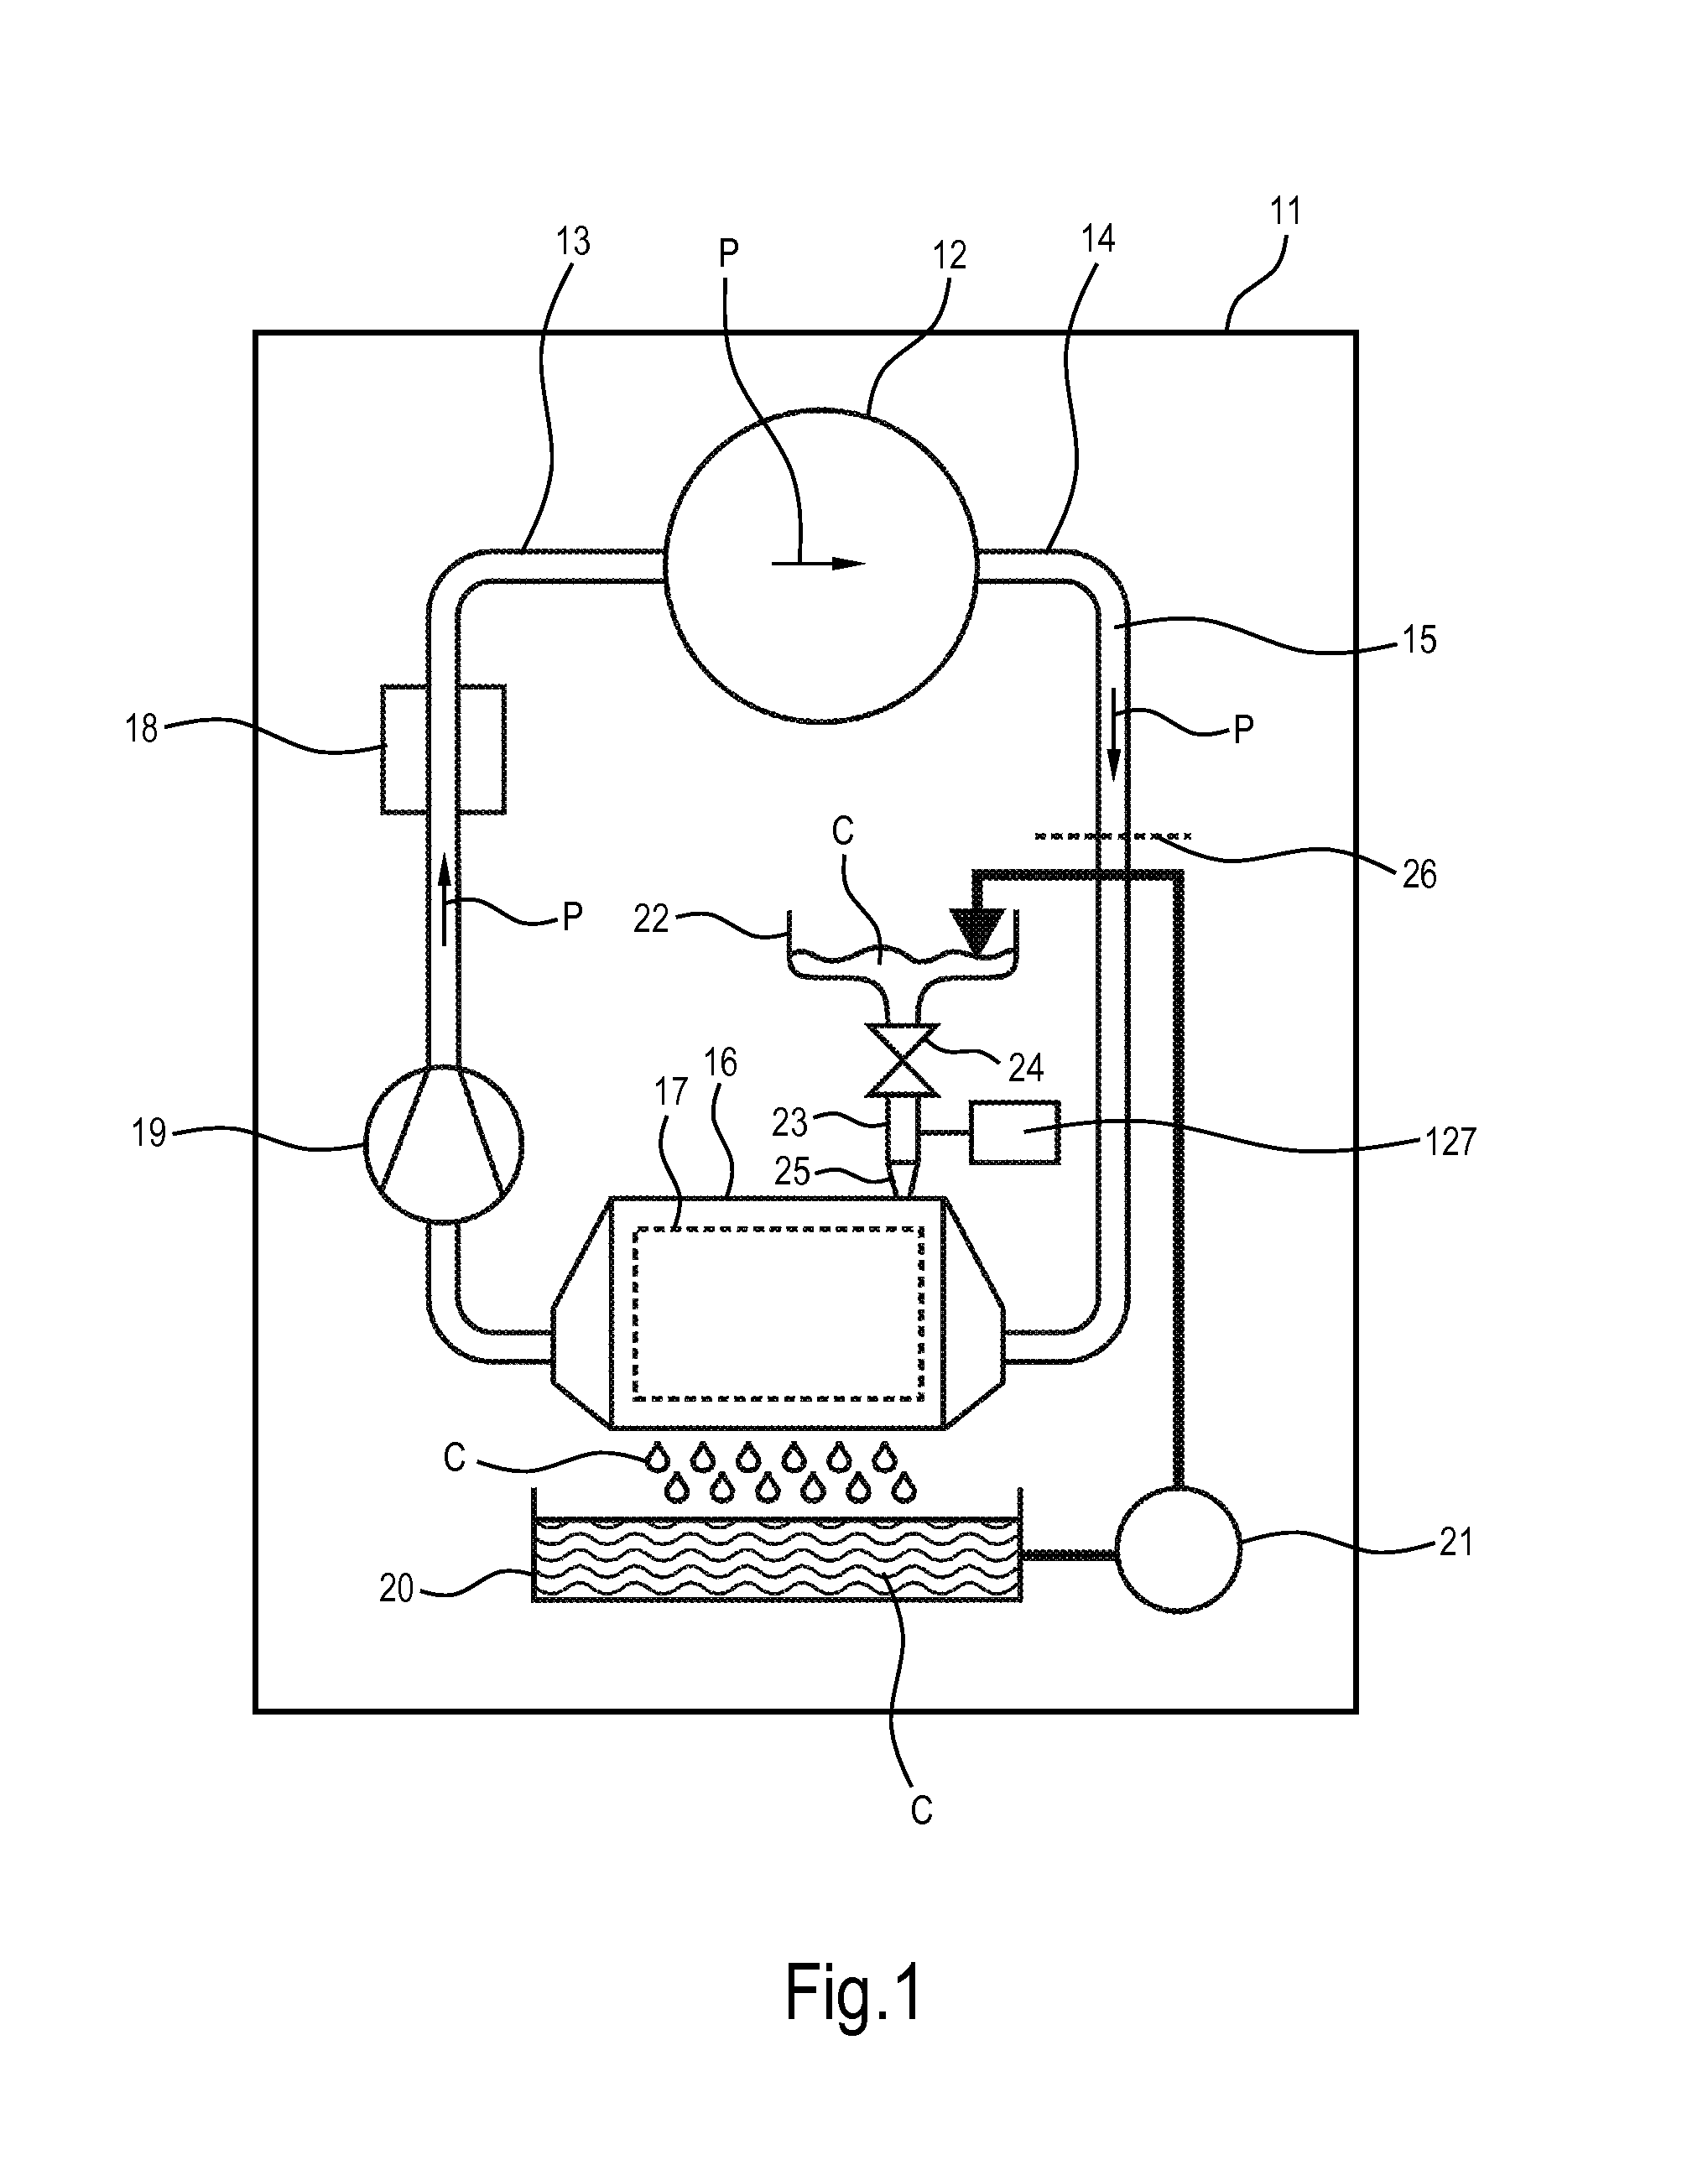 Clothes treatment appliance with transfer pipe